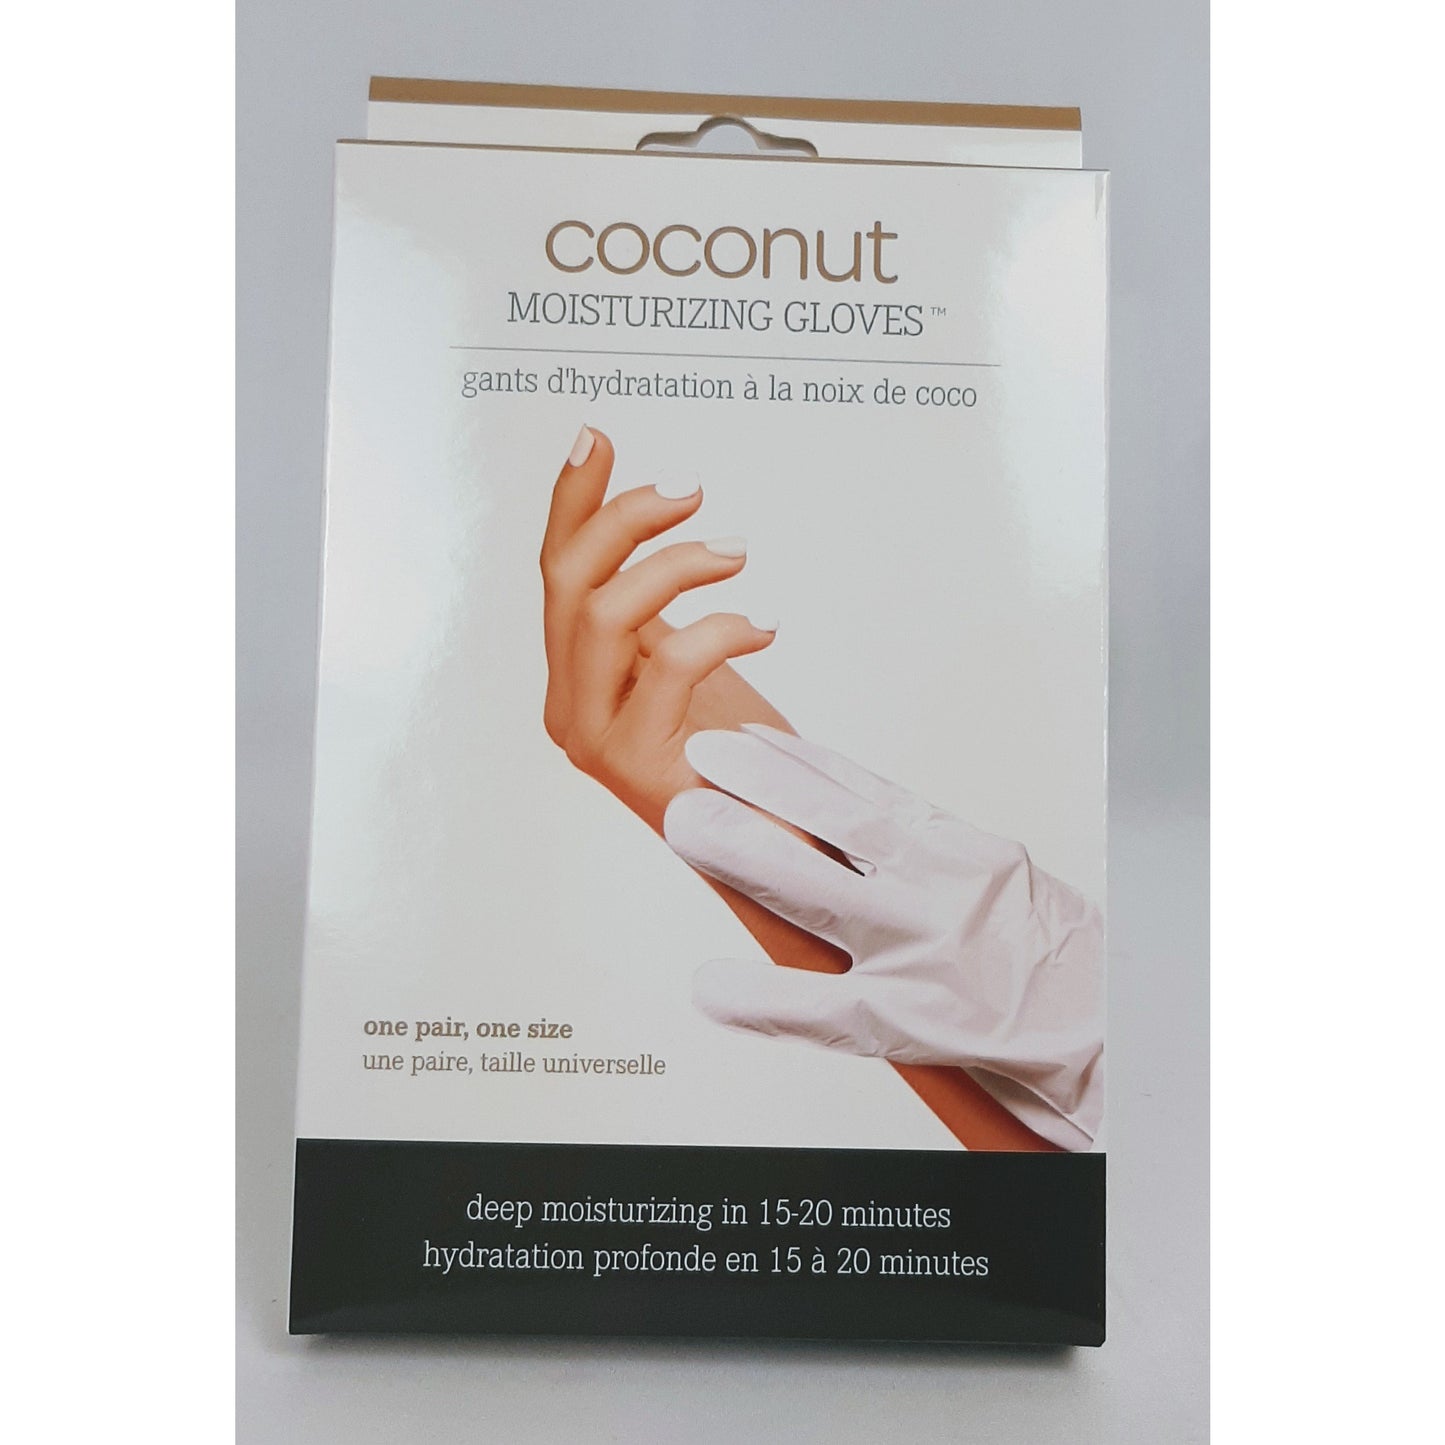 One pair one sdize coconut moisturizing gloves leave your hands soft and supple in 15 to 20 minutes.